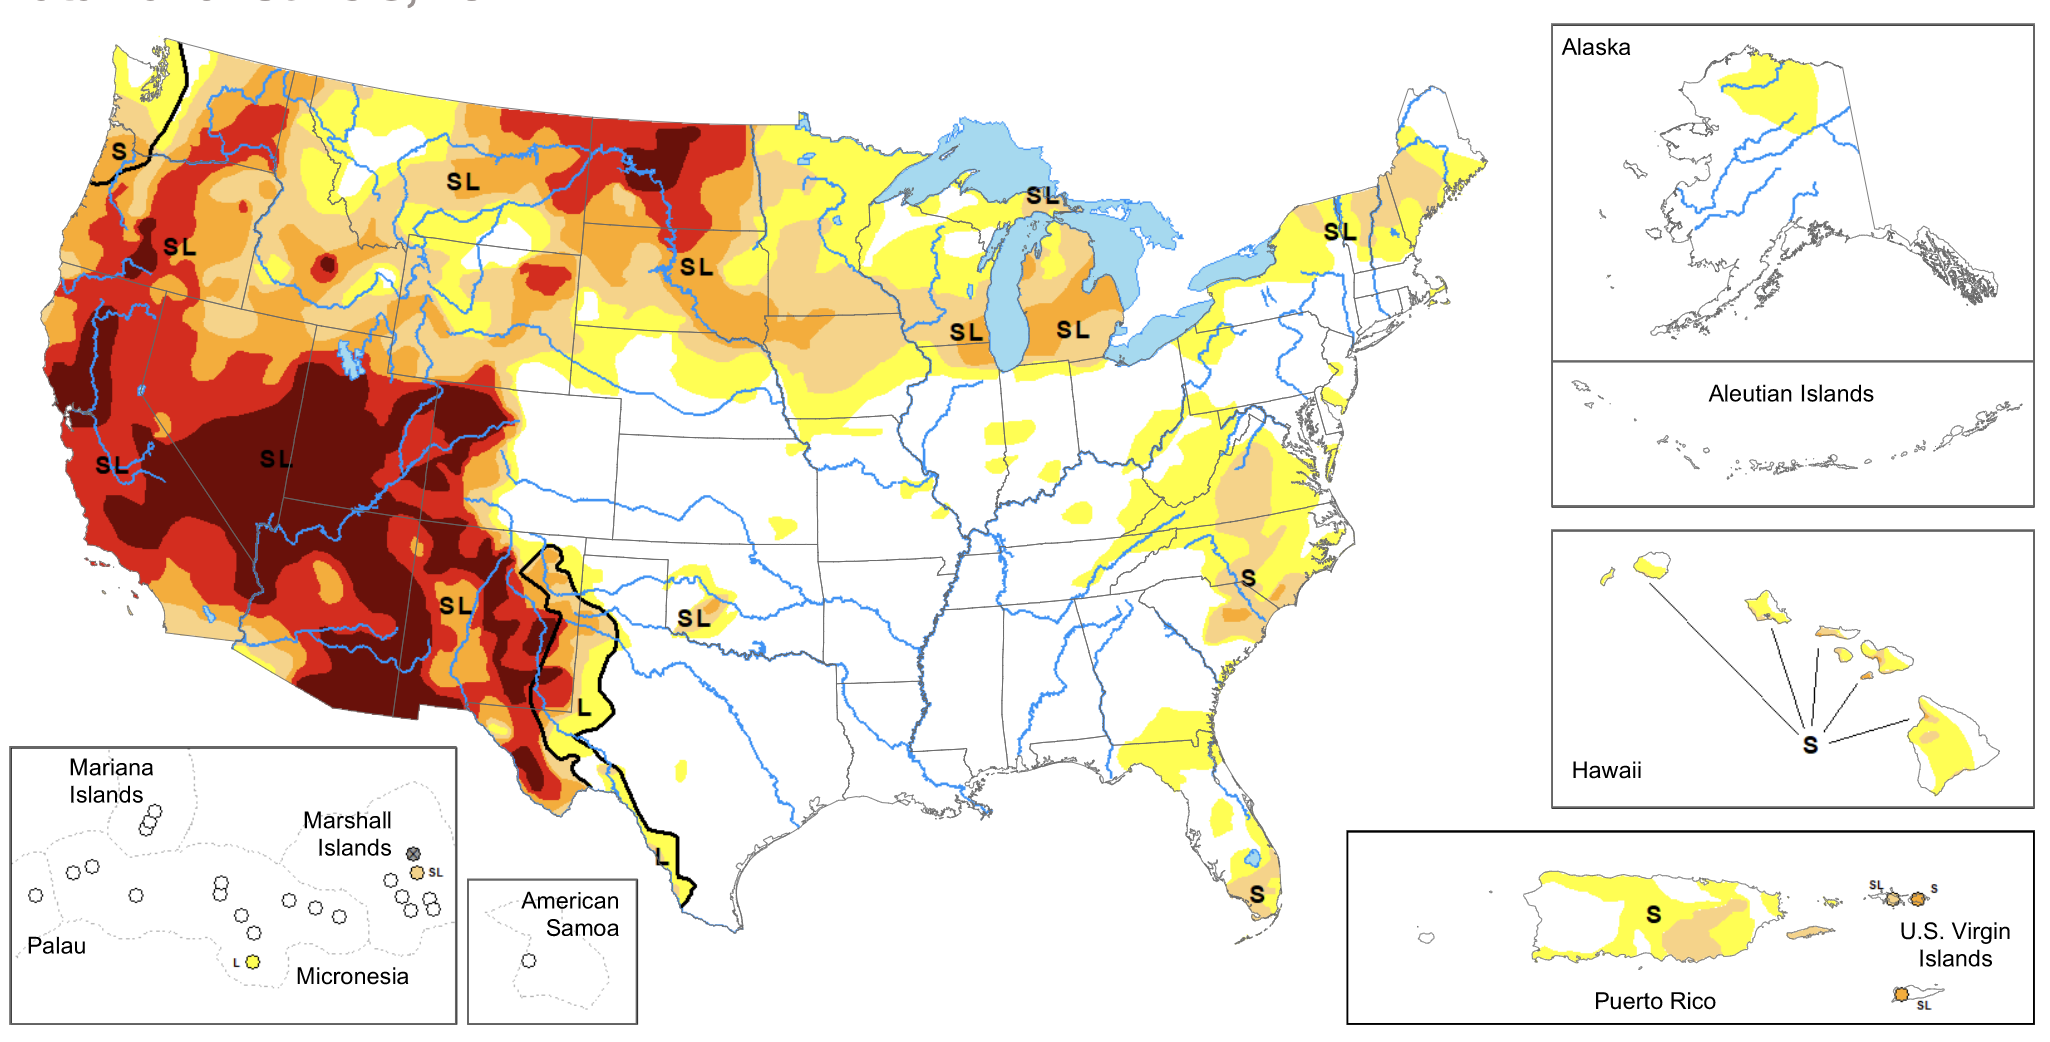 Source: U.S. Drought Monitor for June 2021